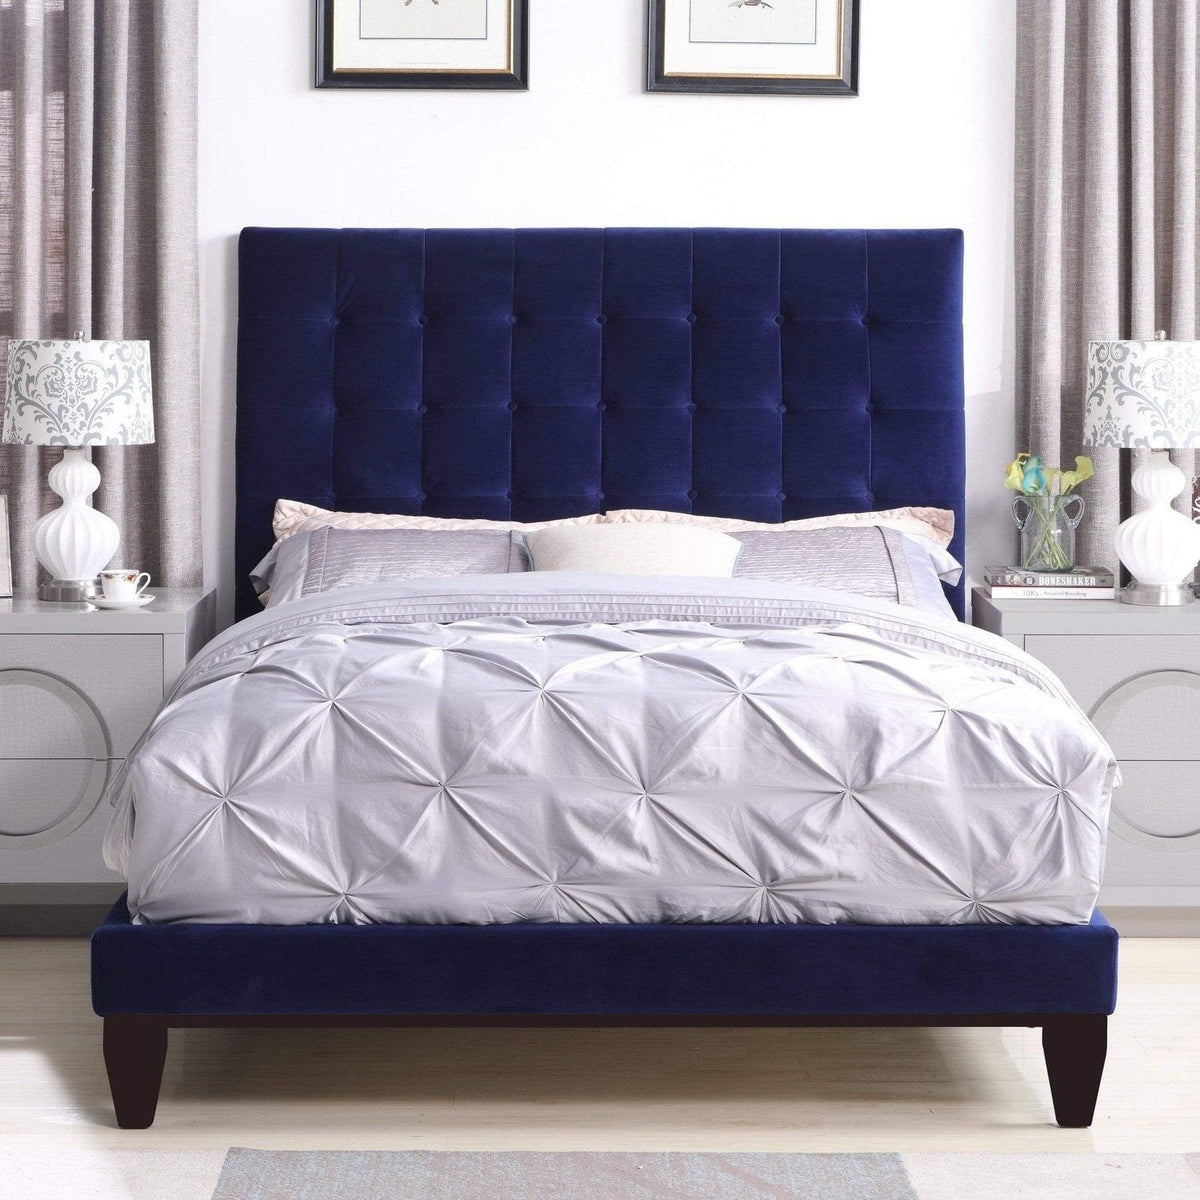 Iconic Home Beethoven Tufted Velvet Bed Frame With Headboard Navy